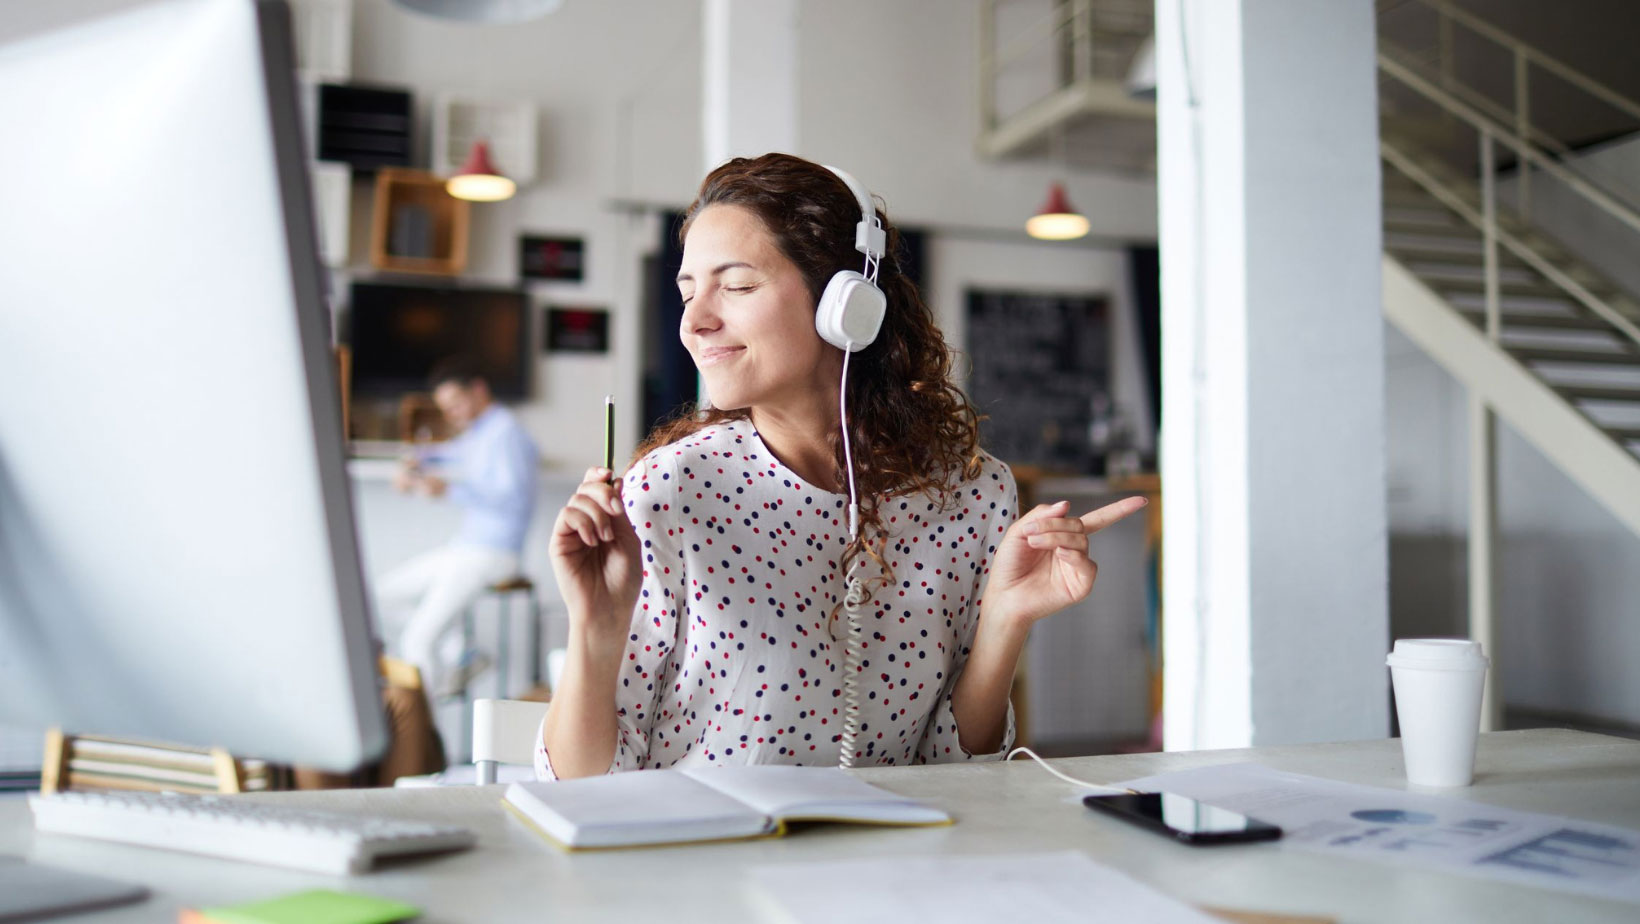 How Music Can Improve Your Work Performance